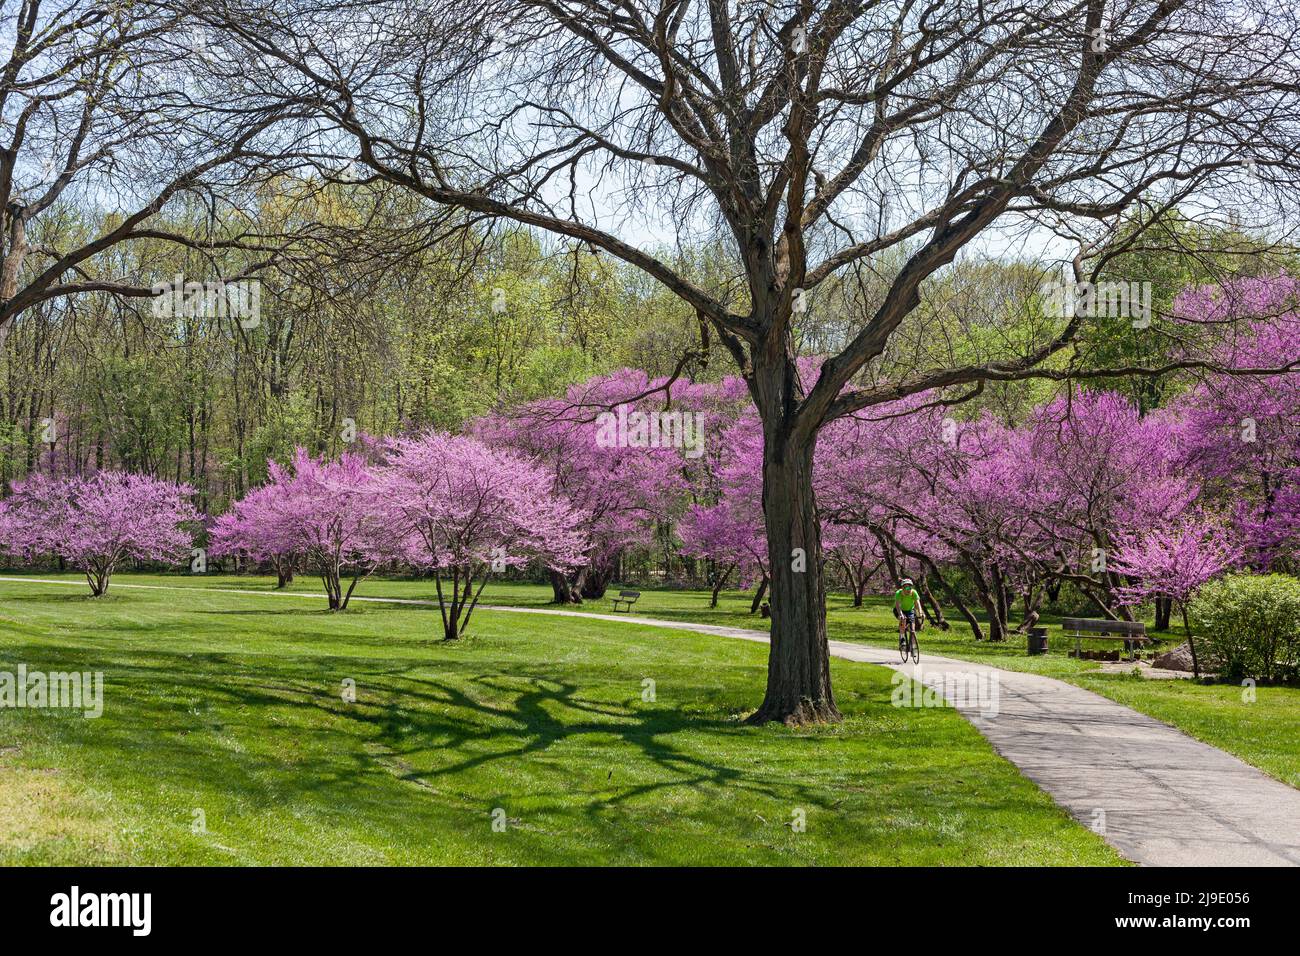 New Boston, Michigan - A bicyclist rides on a path in Lower Huron Metropark, where Eastern Redbud (Cercis canadensis) trees are blooming. Stock Photo